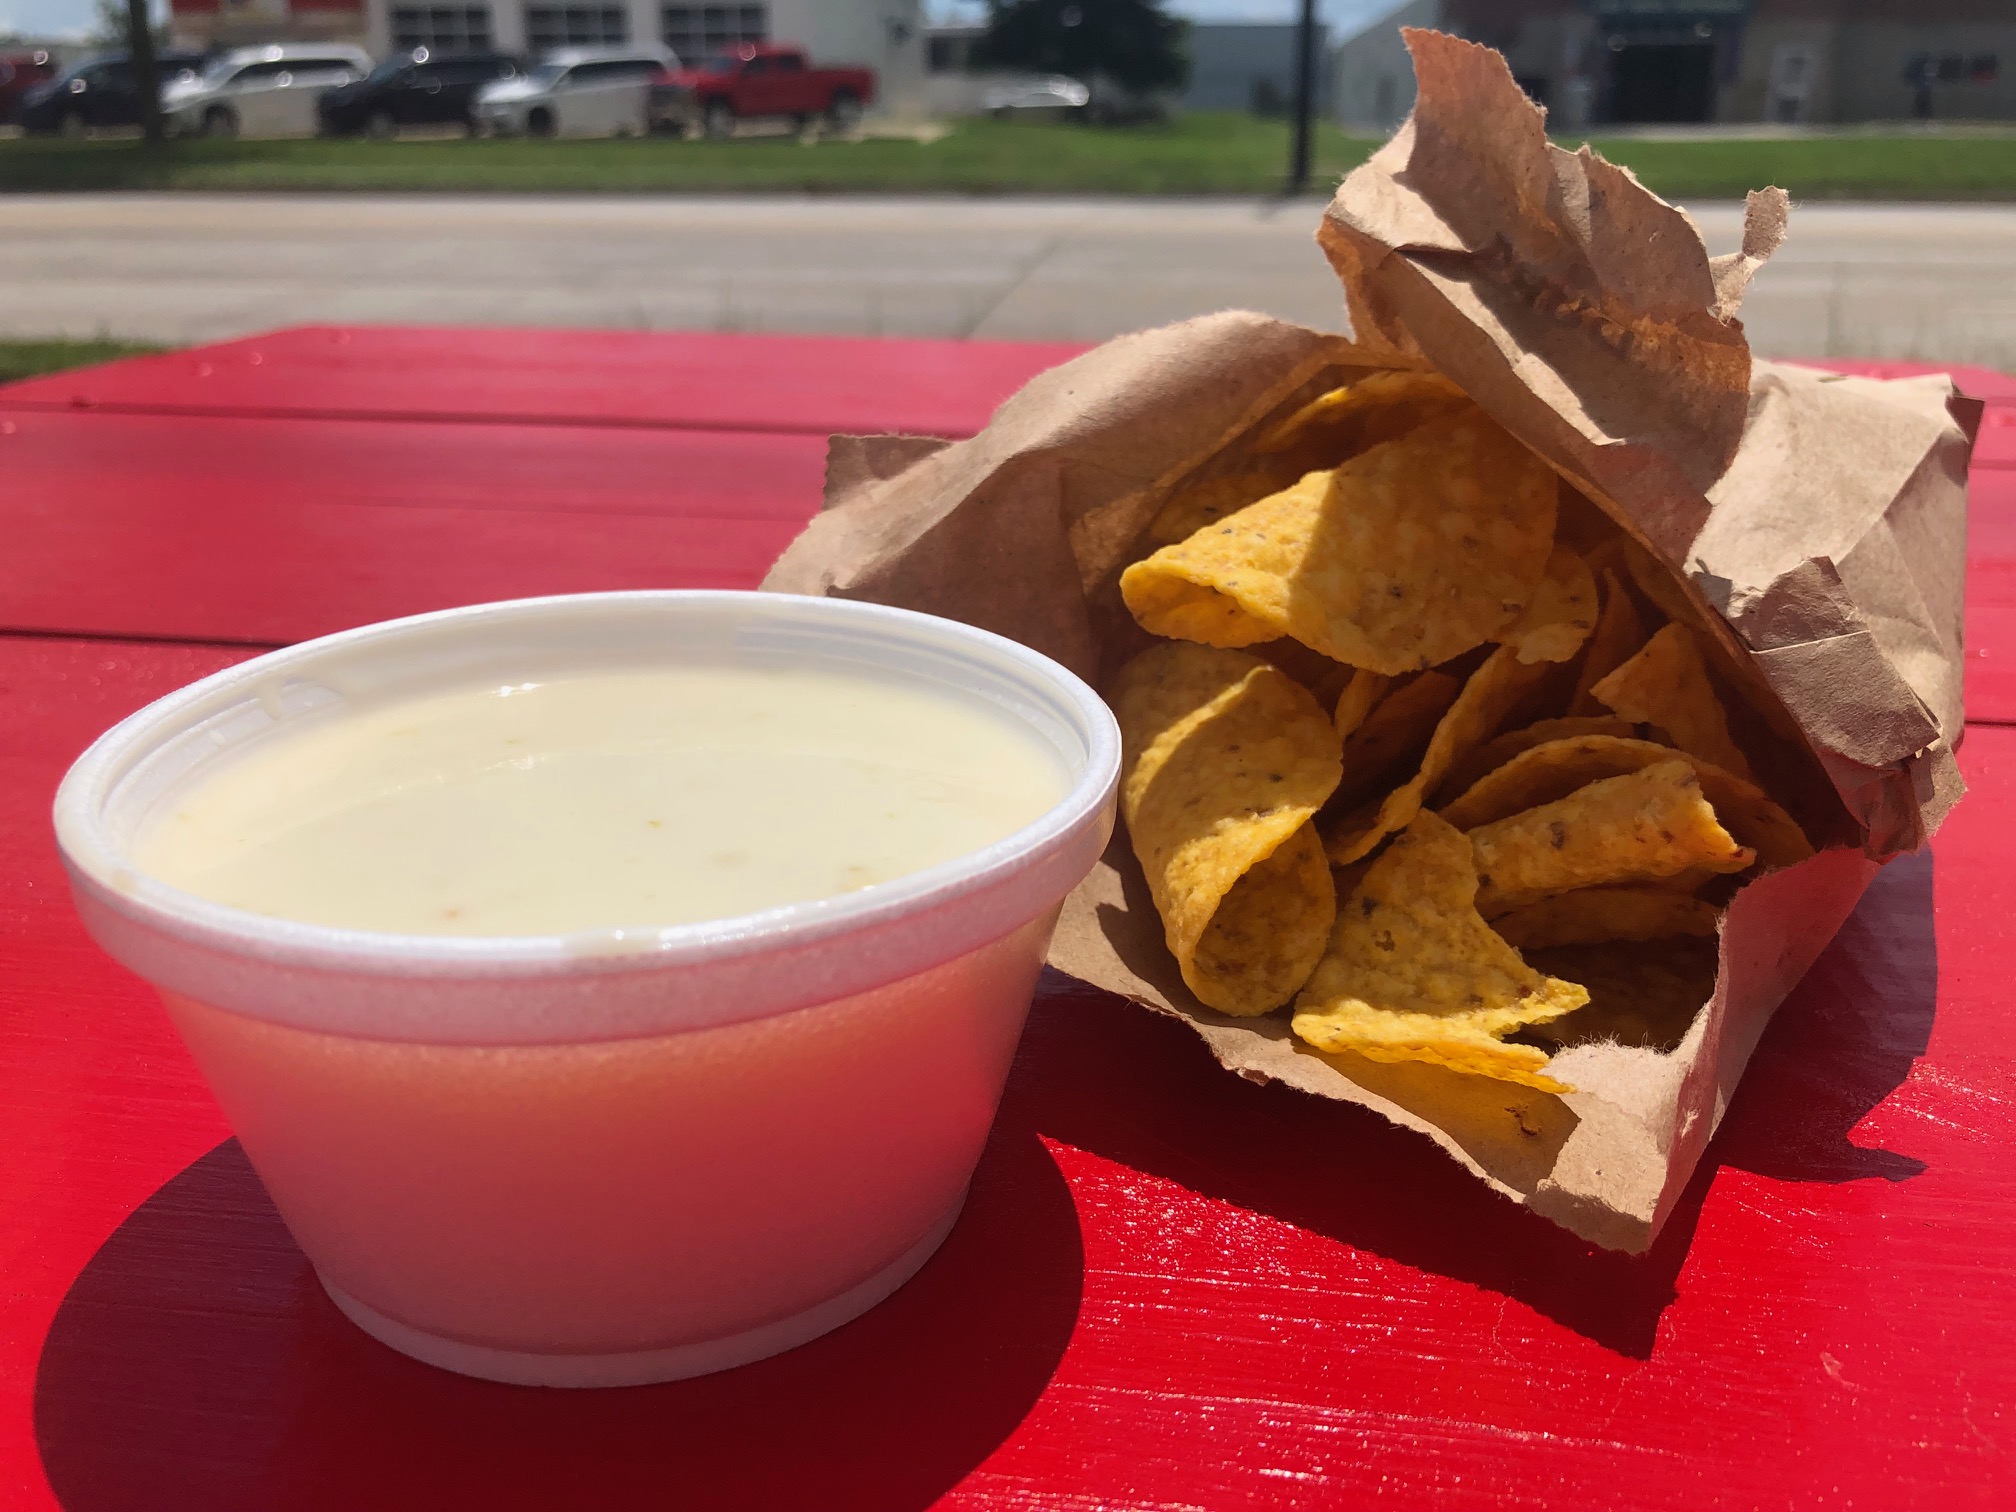 In a styrofoam cup, there is a white cheese dip, and beside that, there is a brown paper bag of orange chips on a red picnic table outside SeÃ±ores Taco in Champaign. Photo by Alyssa Buckley.